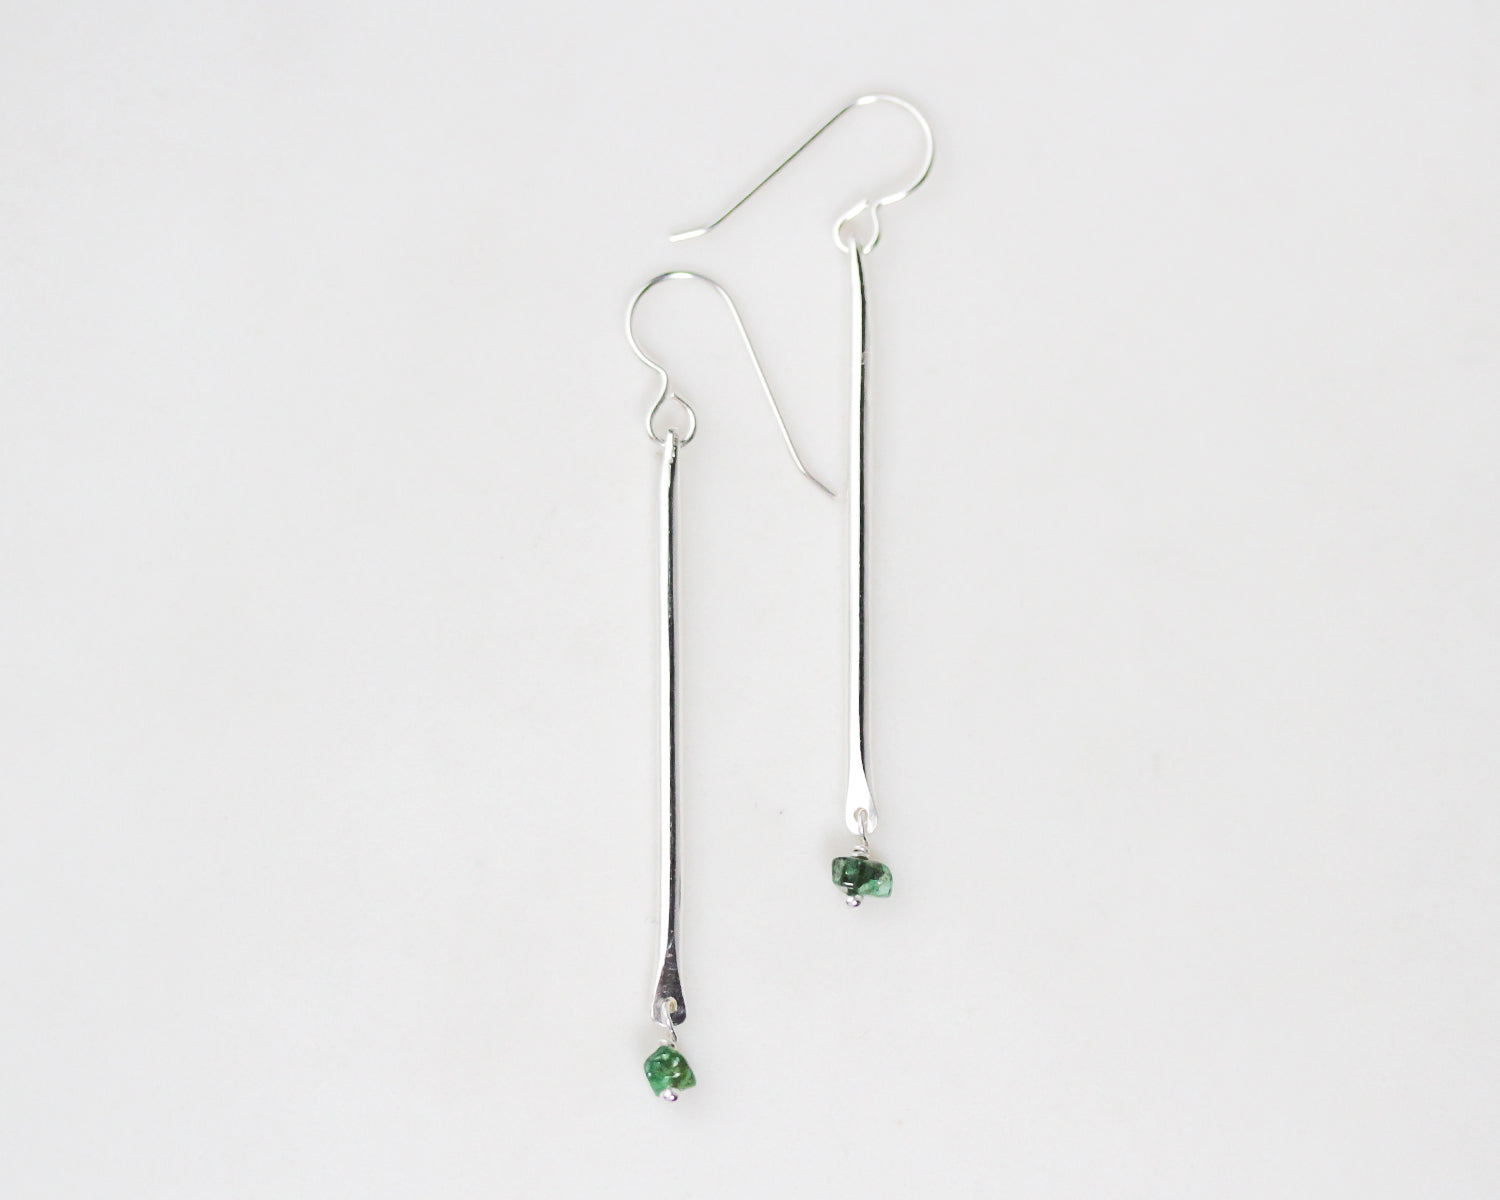 Close up image features our birthstone bar earrings in sterling silver with genuine emeralds falling delicately from the handmade bar earrings. Beautiful ear wires in sterling silver grace the bars. We hand hammered them to offer texture and bling.